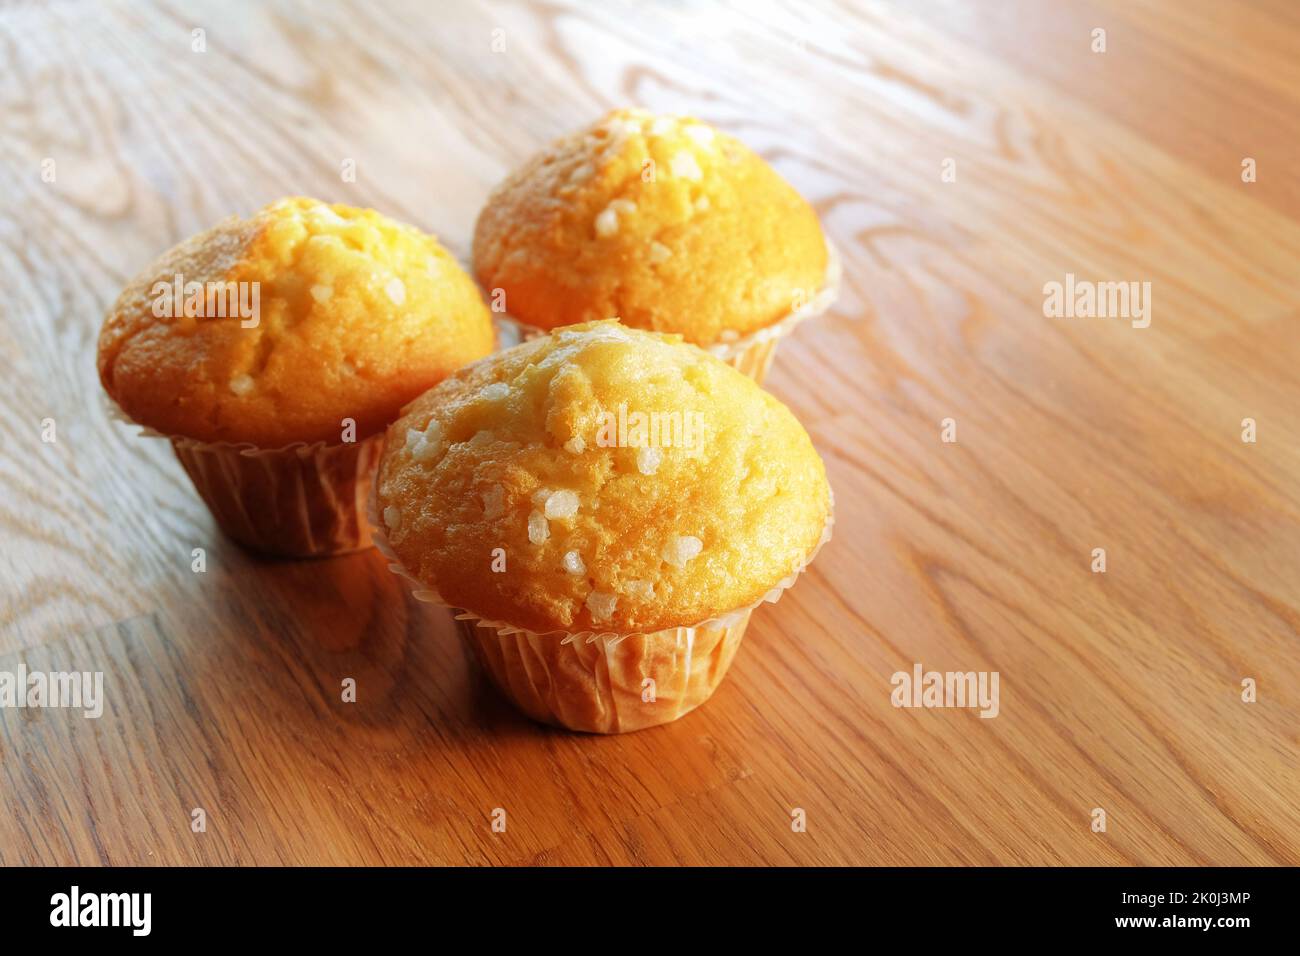 Three lemon flavored sponge muffins with sugar crystals sprinkled on top. On a wooden table surface copy space Stock Photo